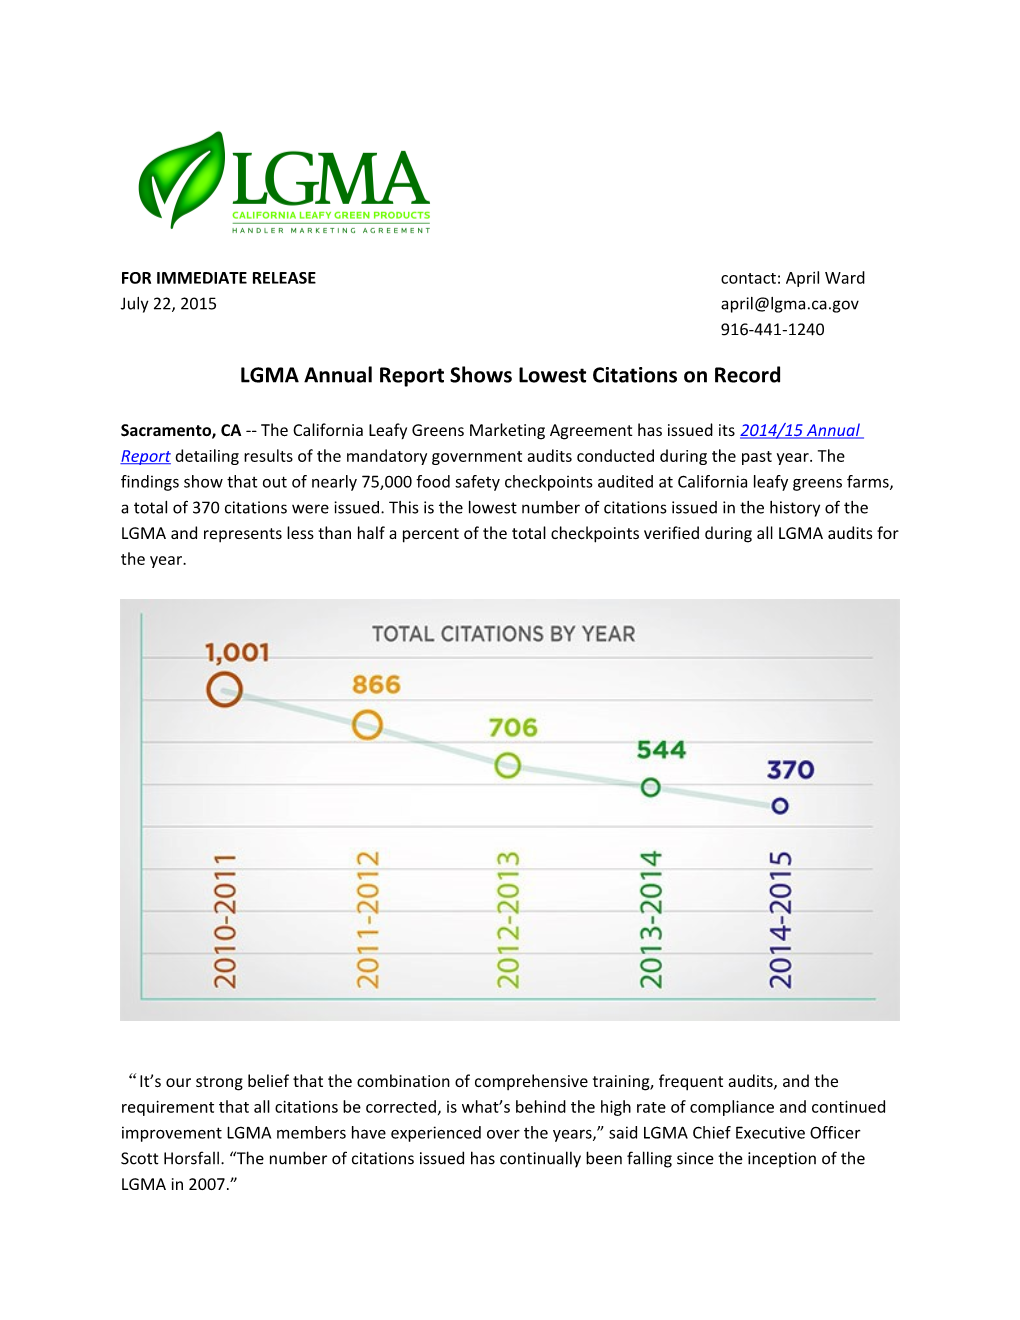 LGMA Annual Report Shows Lowest Citations on Record